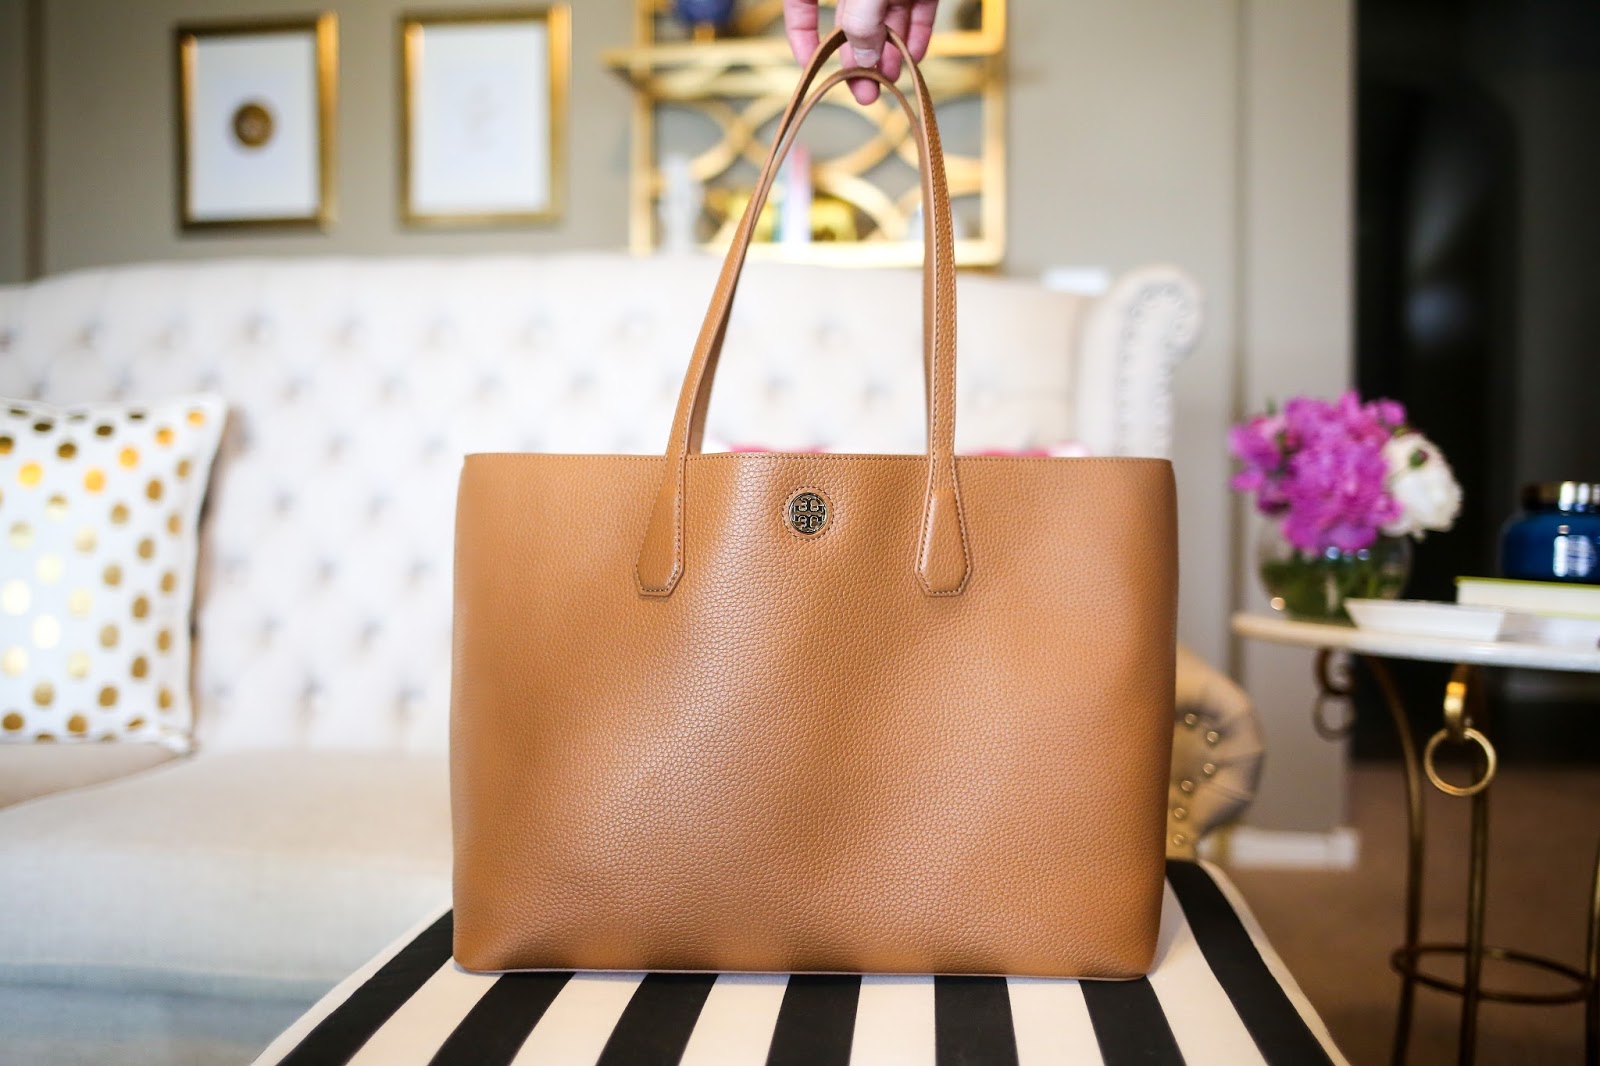 Tory Burch Bag Review | The Sweetest Thing